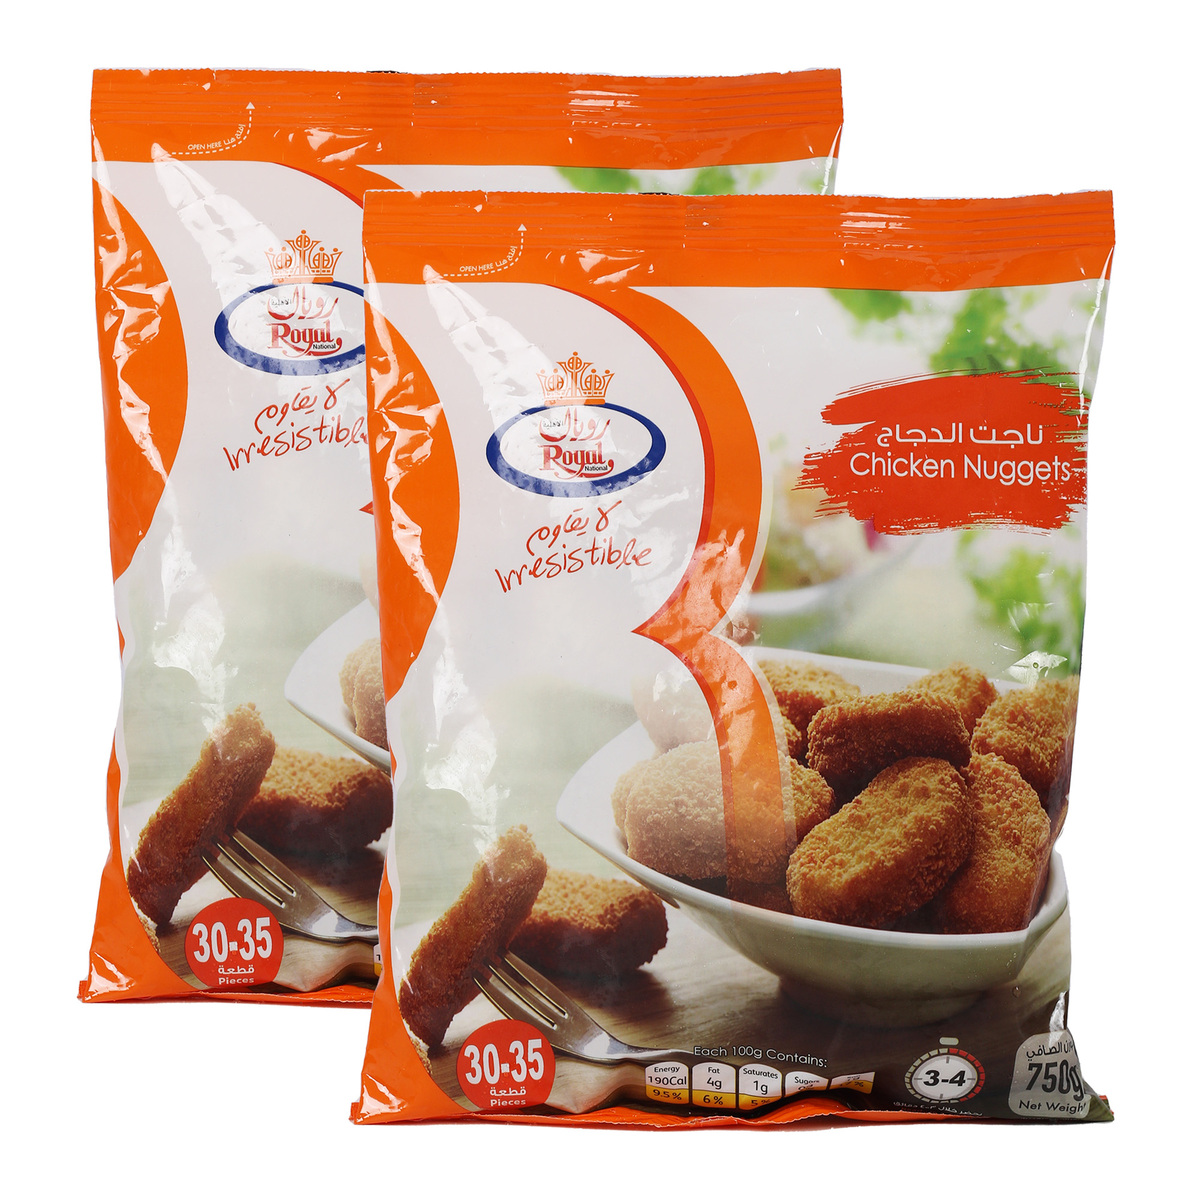 Royal Chicken Nuggets Value Pack 2 x 750g